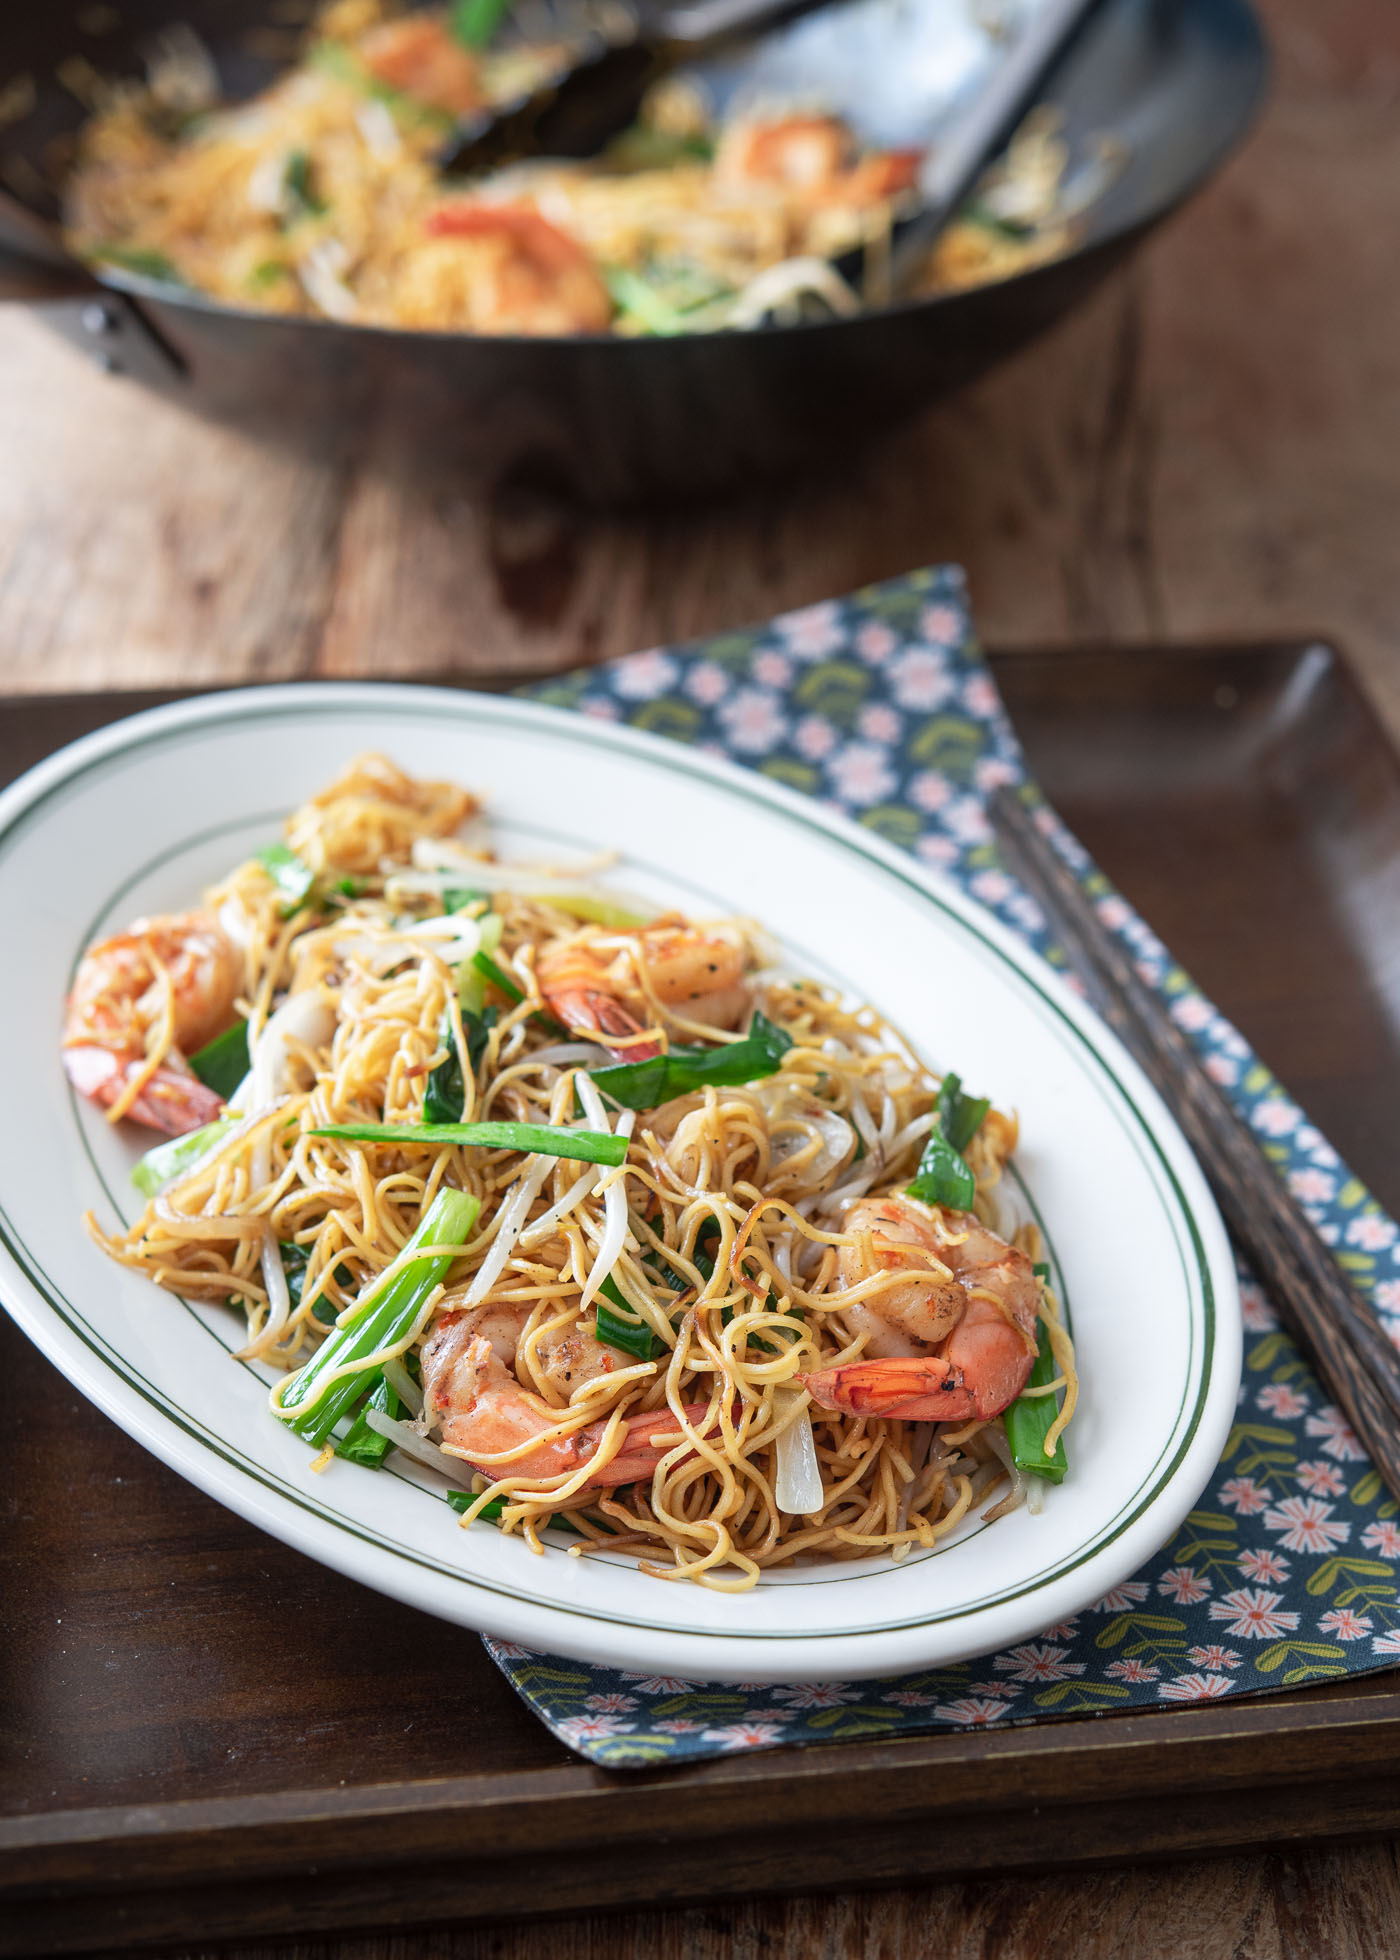 A plate of Cantonese style Hone Kong noodles with shrimp and vegetables.